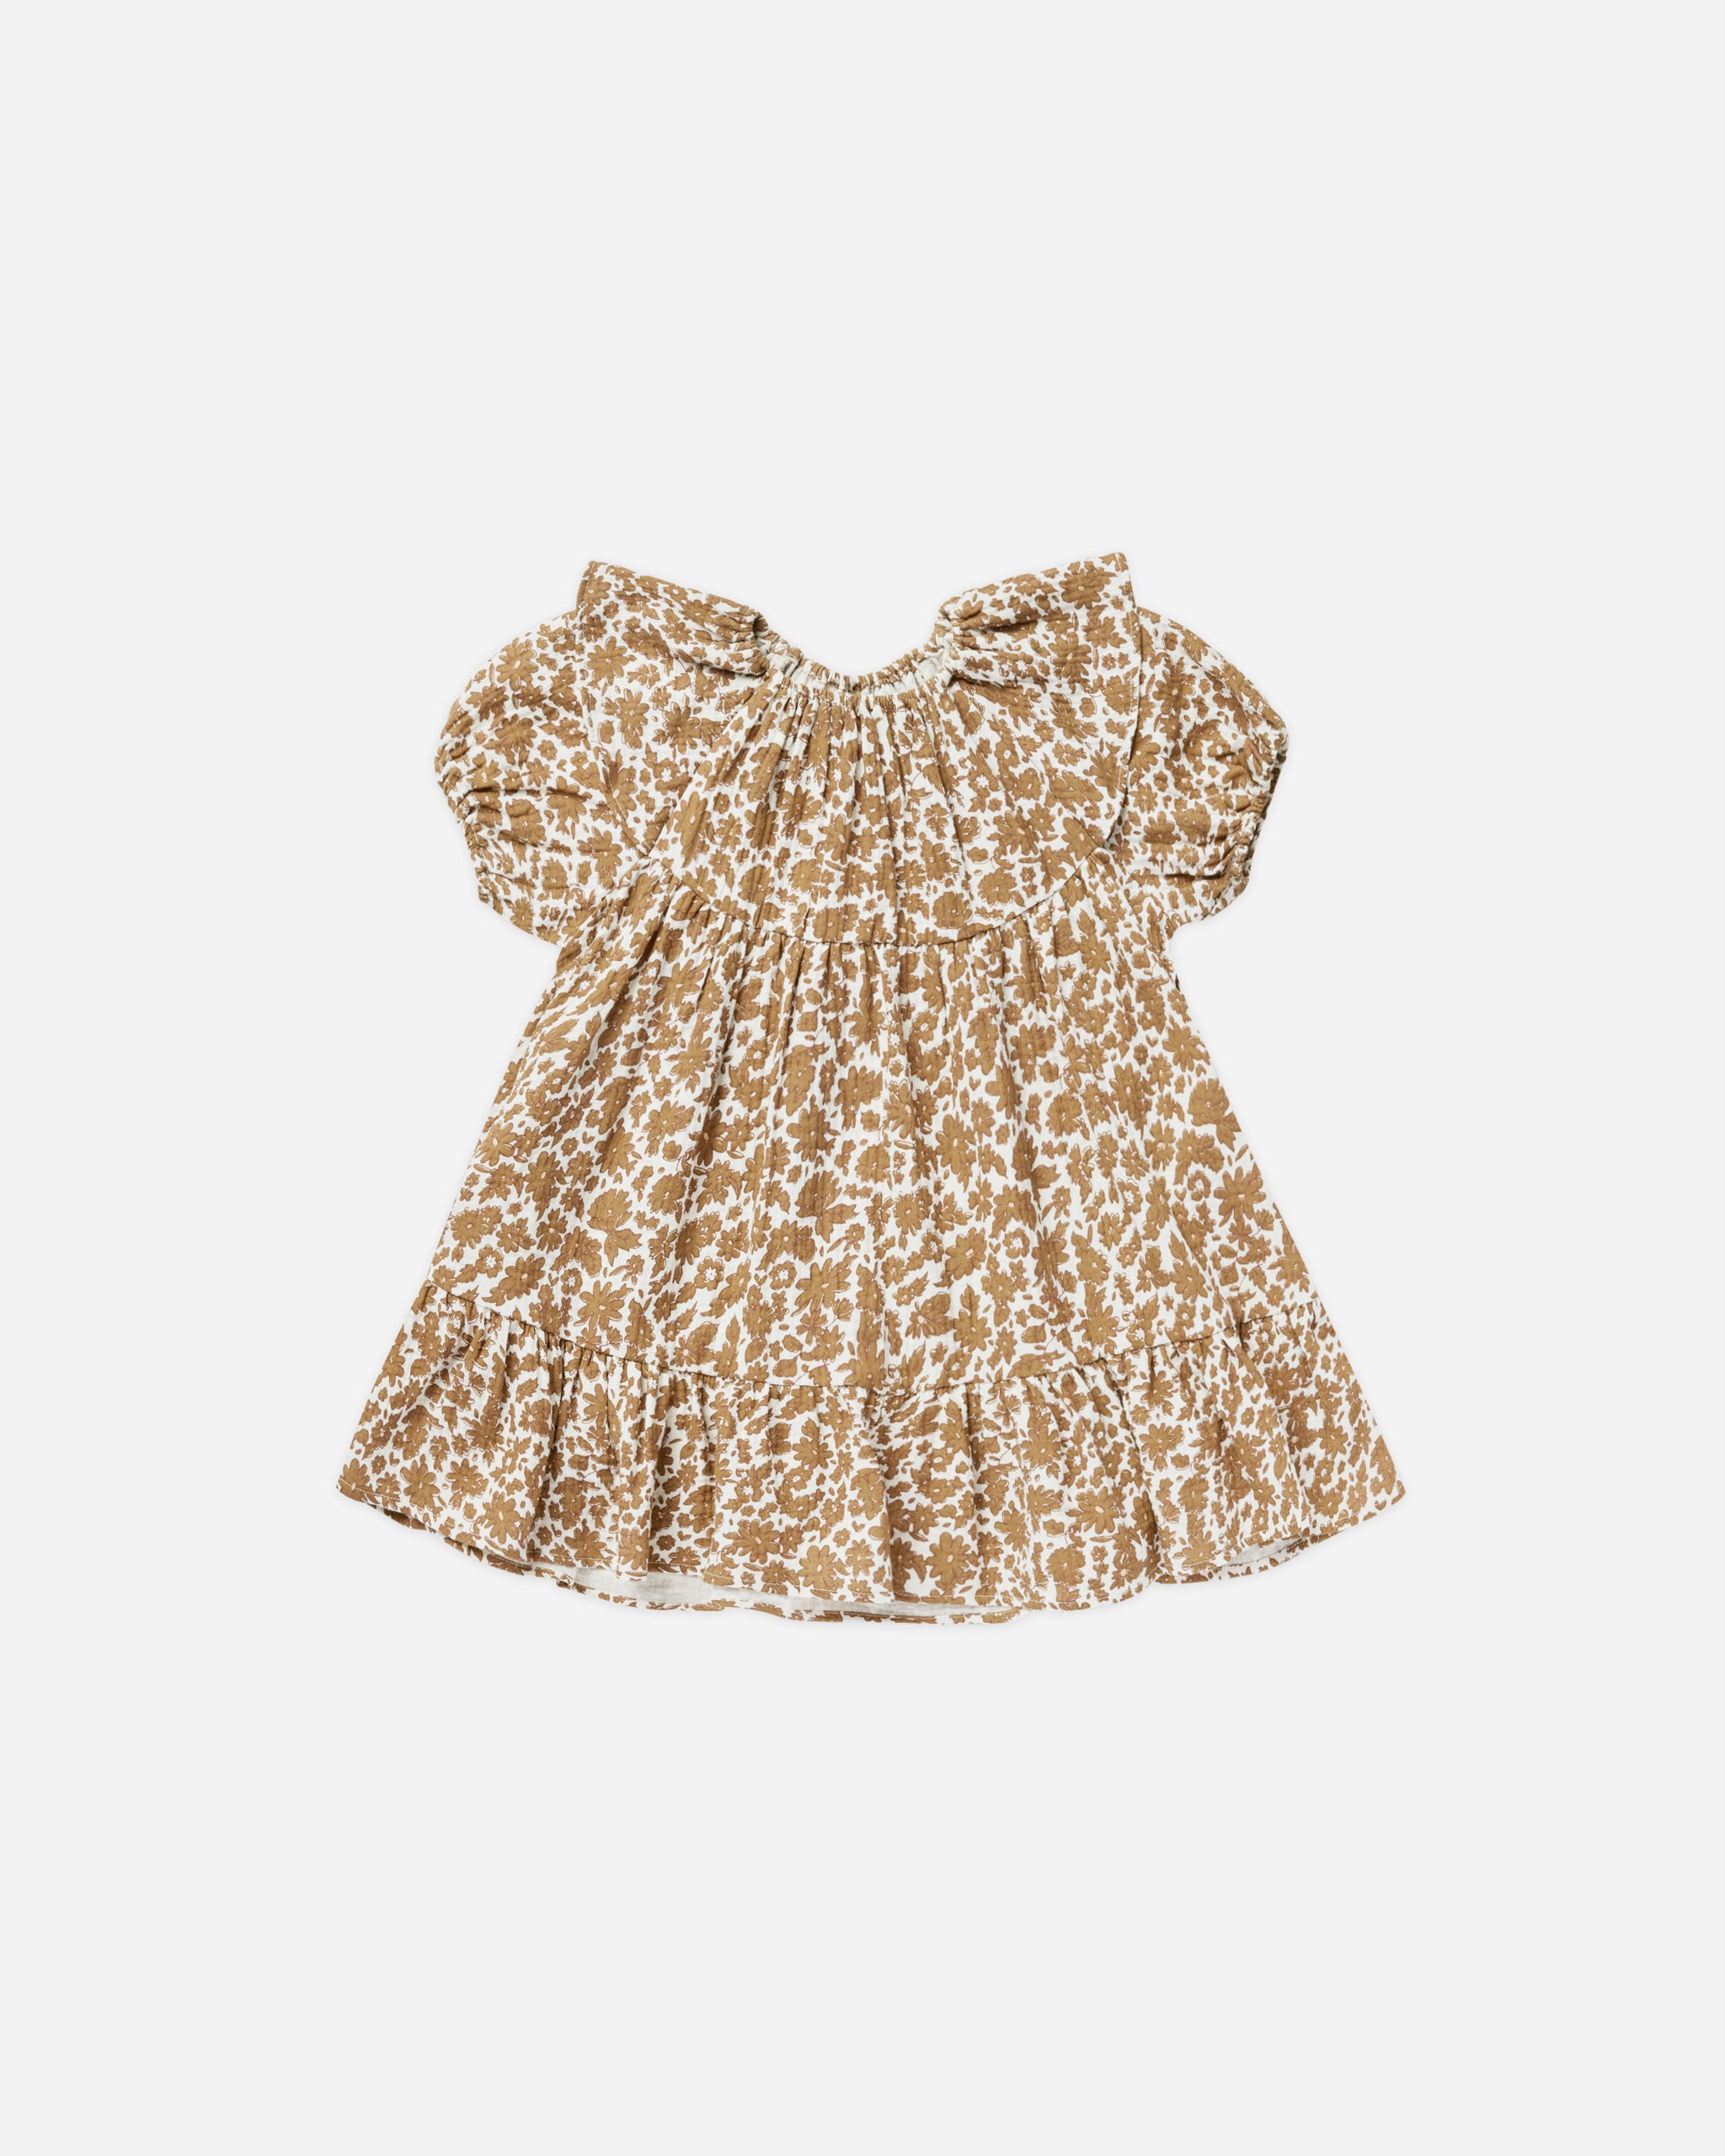 Willow Dress || Gold Gardens - Rylee + Cru | Kids Clothes | Trendy Baby Clothes | Modern Infant Outfits |